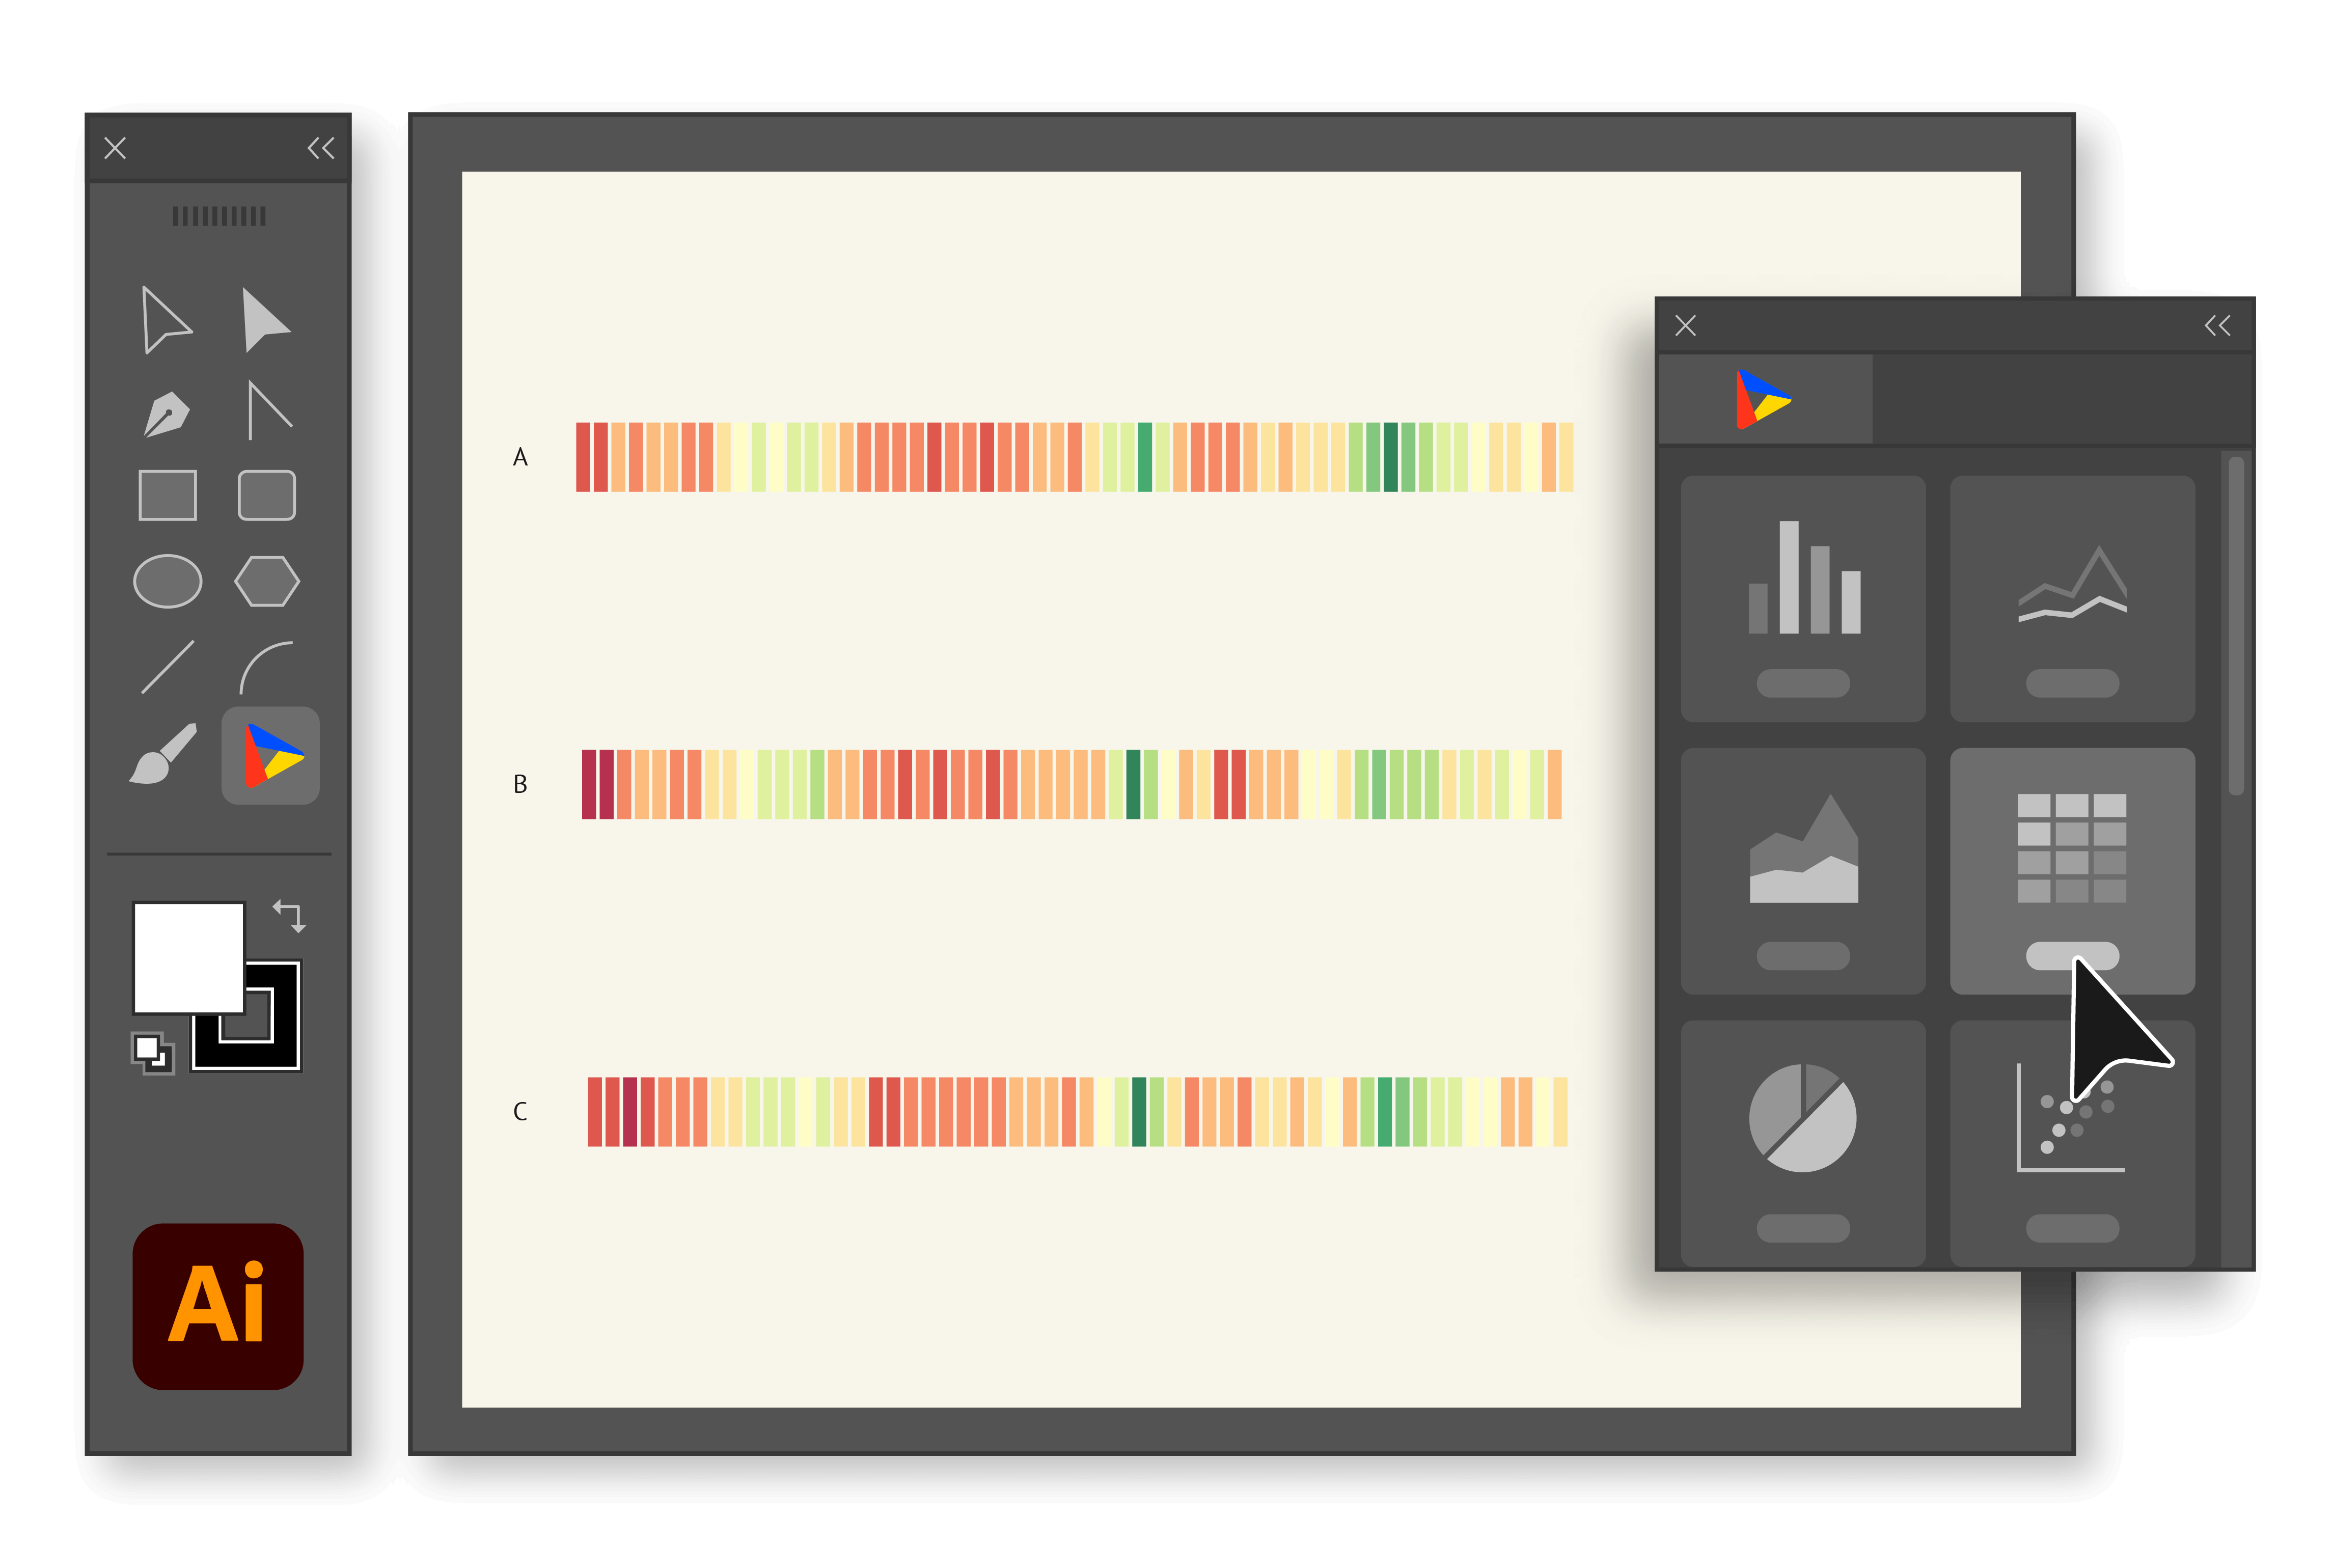 Try Datylon for Illustrator - our robust plugin for Adobe Illustrator to design the most beautiful charts and reports.